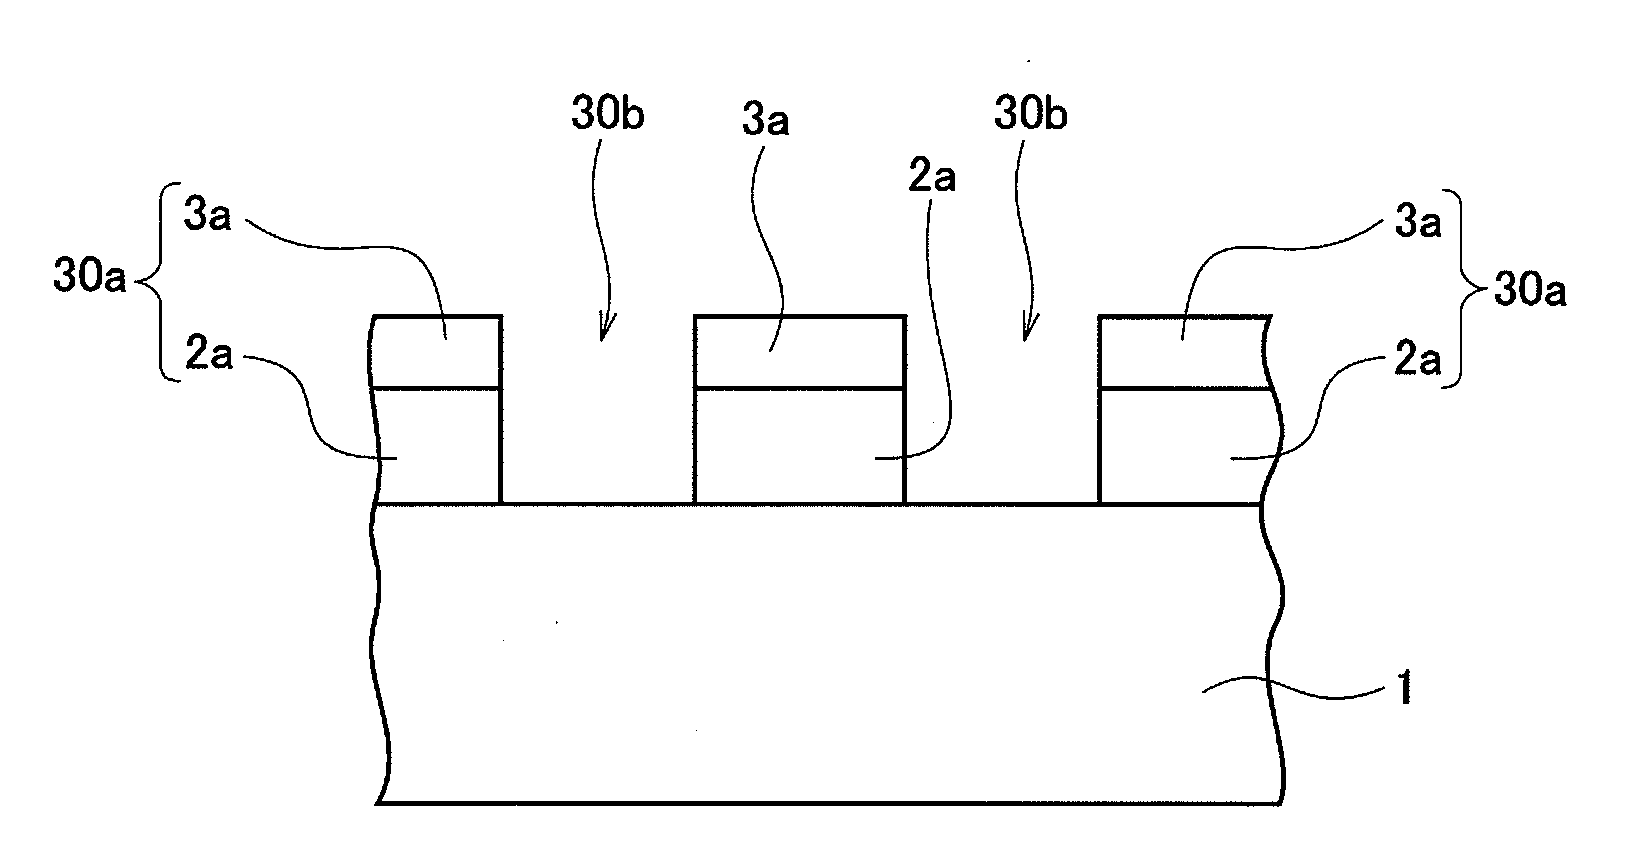 Photomask blank, photomask, and methods of manufacturing the same